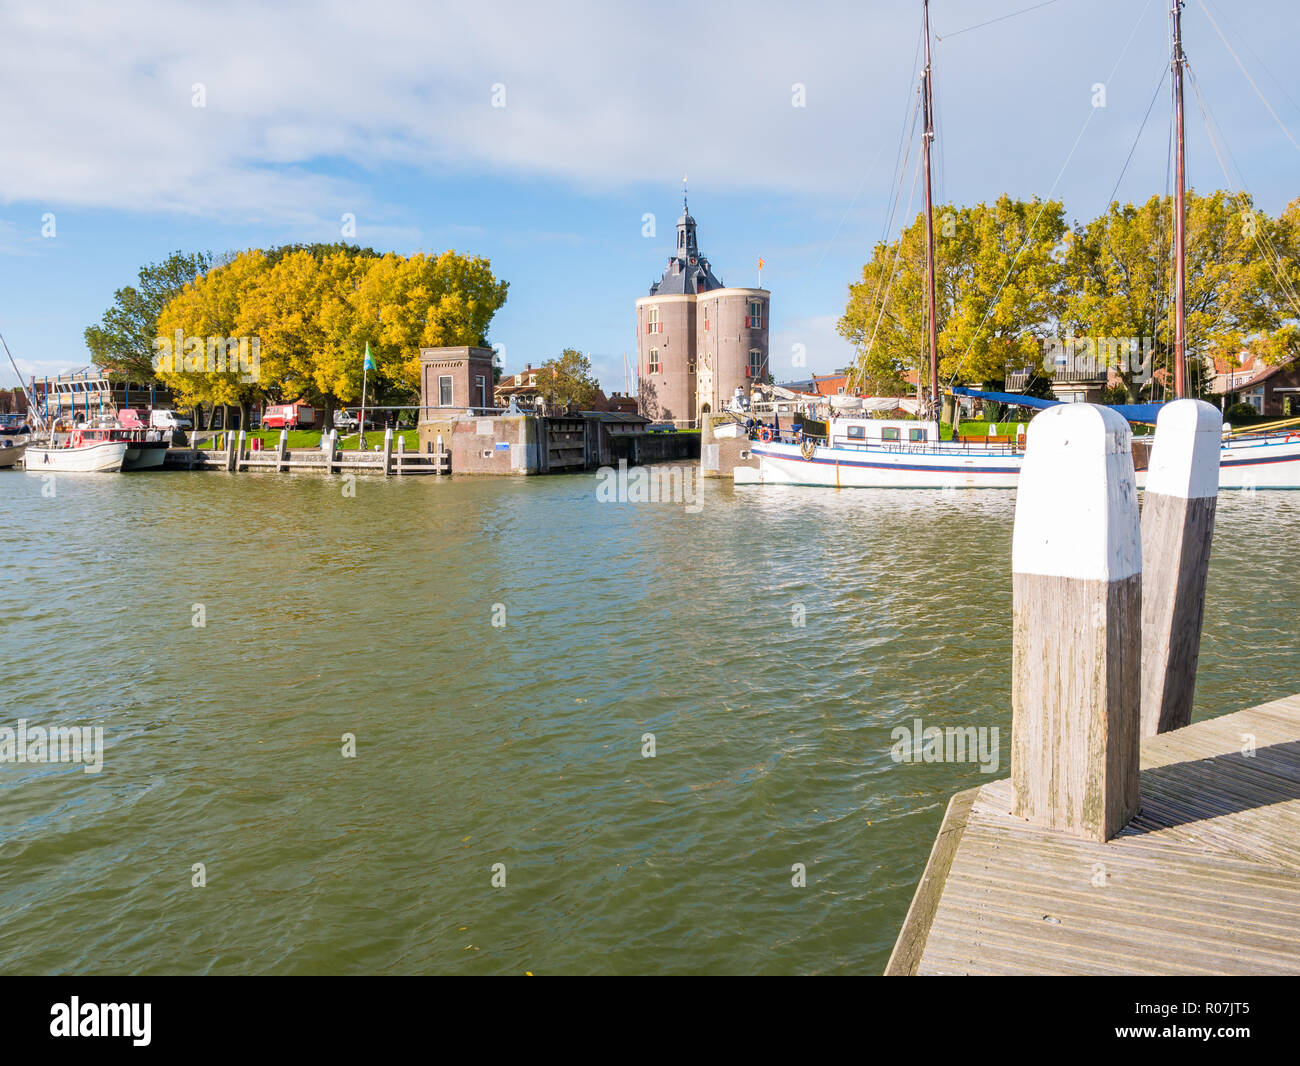 Entrance of old harbour and city gate Drommedaris in historic city of Enkhuizen, Noord-Holland, Netherlands Stock Photo